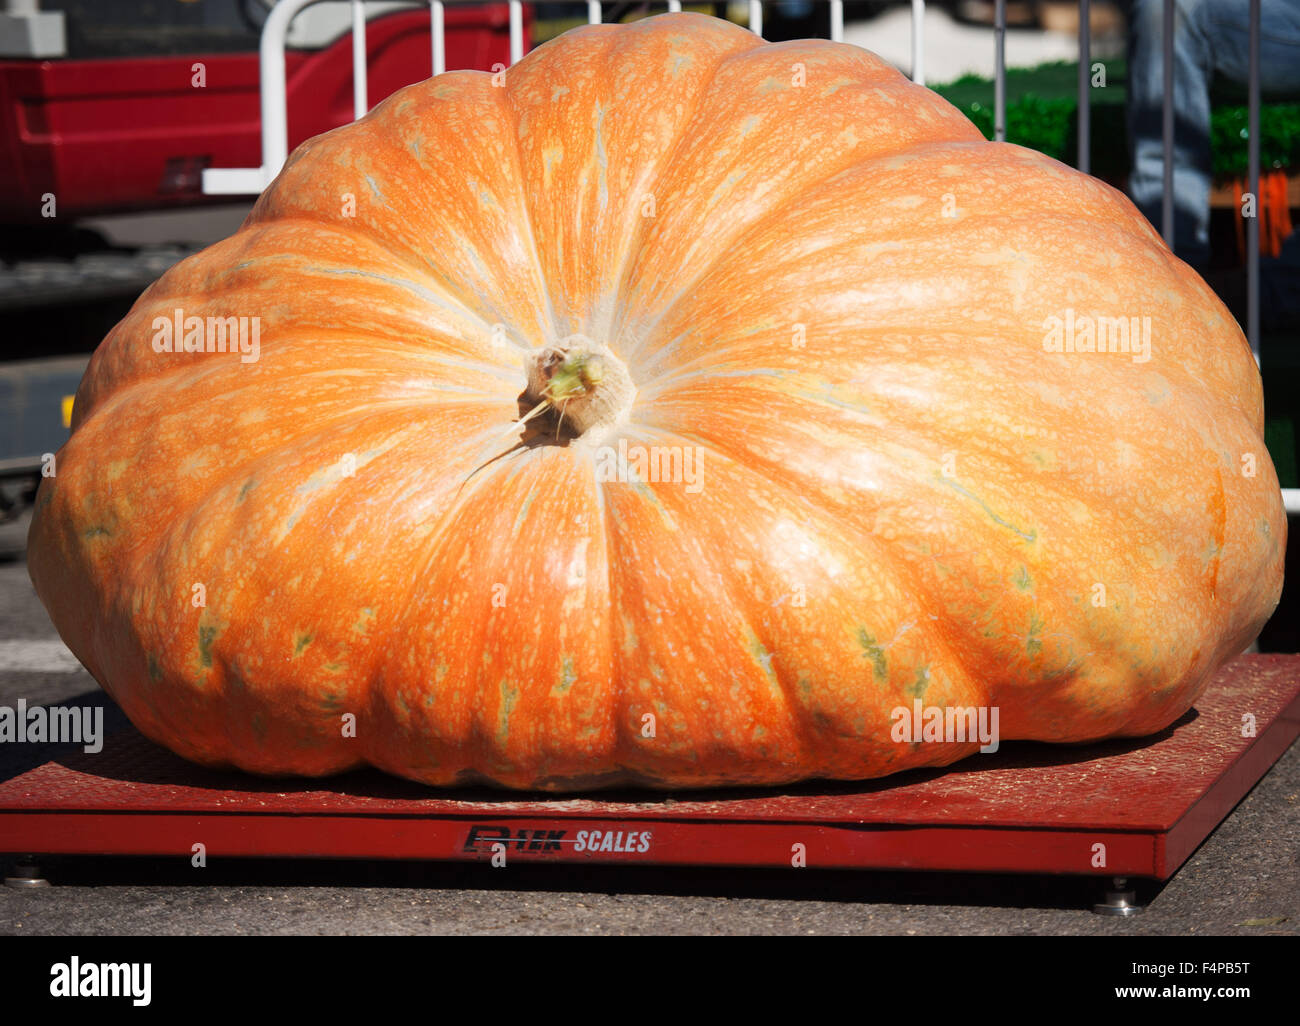 Circleville, Ohio, USA. 21st Oct, 2015. Rusty Ortman's winning 1,666 lb. Pumpkin at the 109th Annual Circleville Pumpkin Show in Circleville, Ohio. Credit:  Brent Clark/Alamy Live News Stock Photo